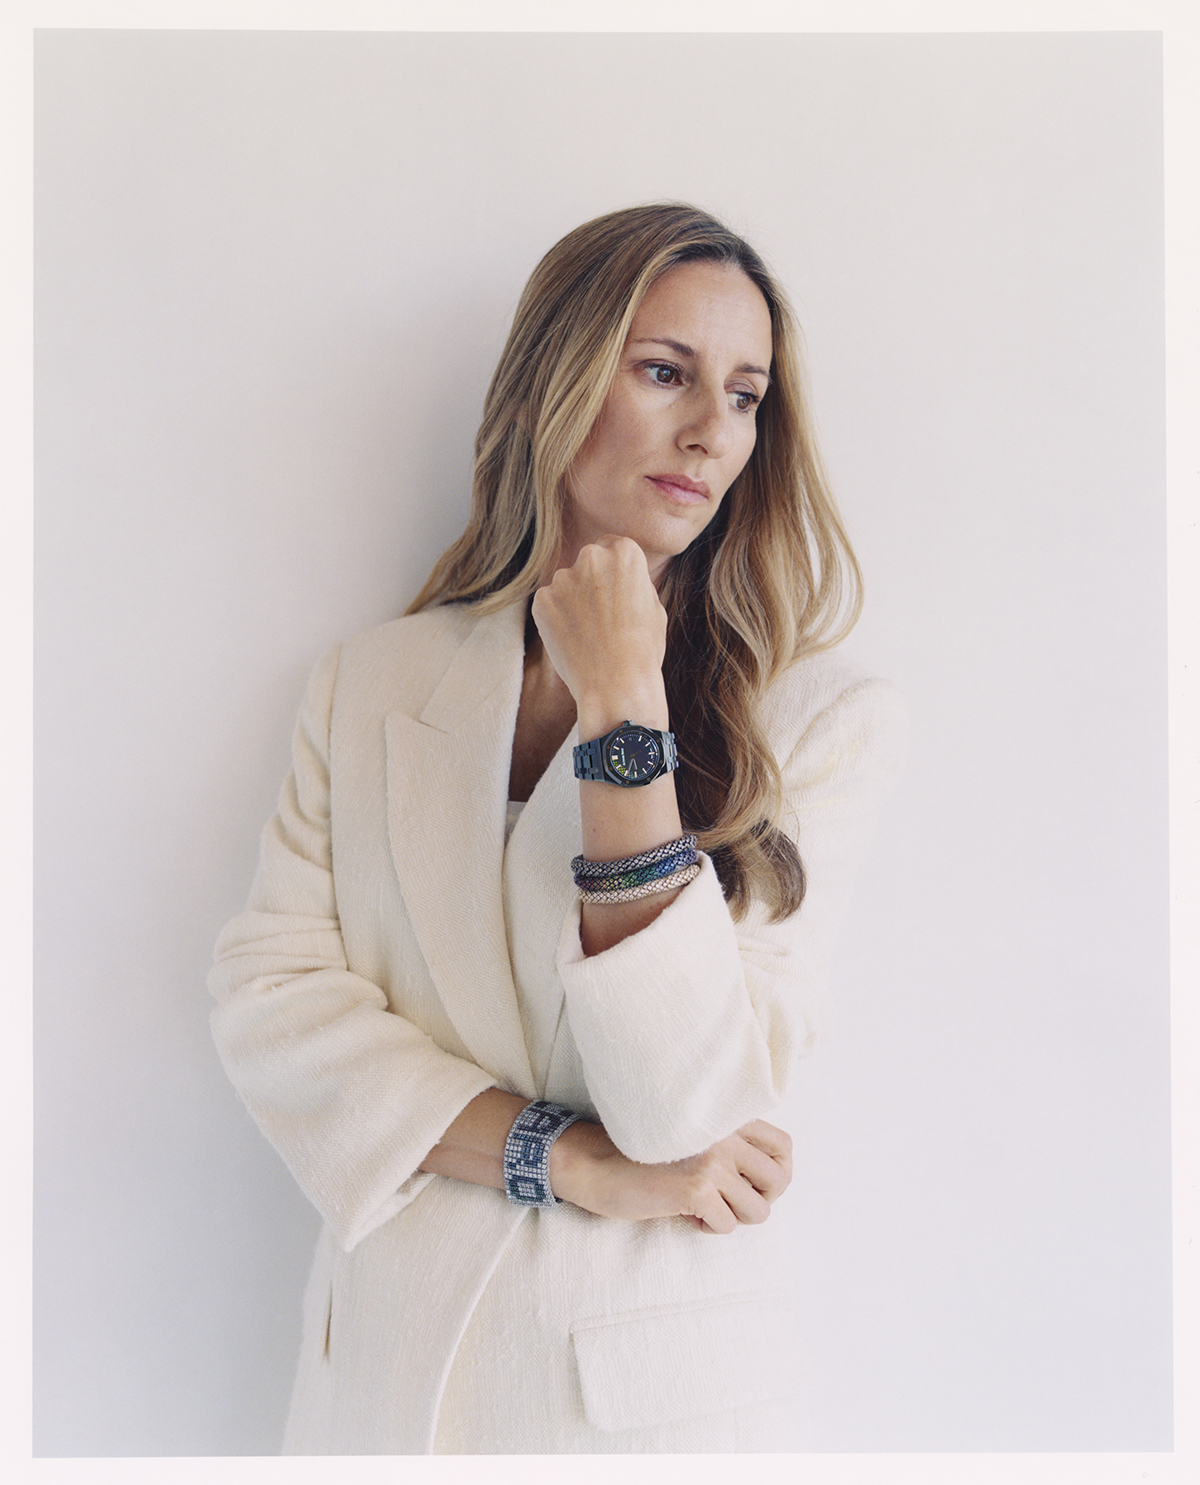 A blonde woman wearing a white jacket and a watch with bracelets